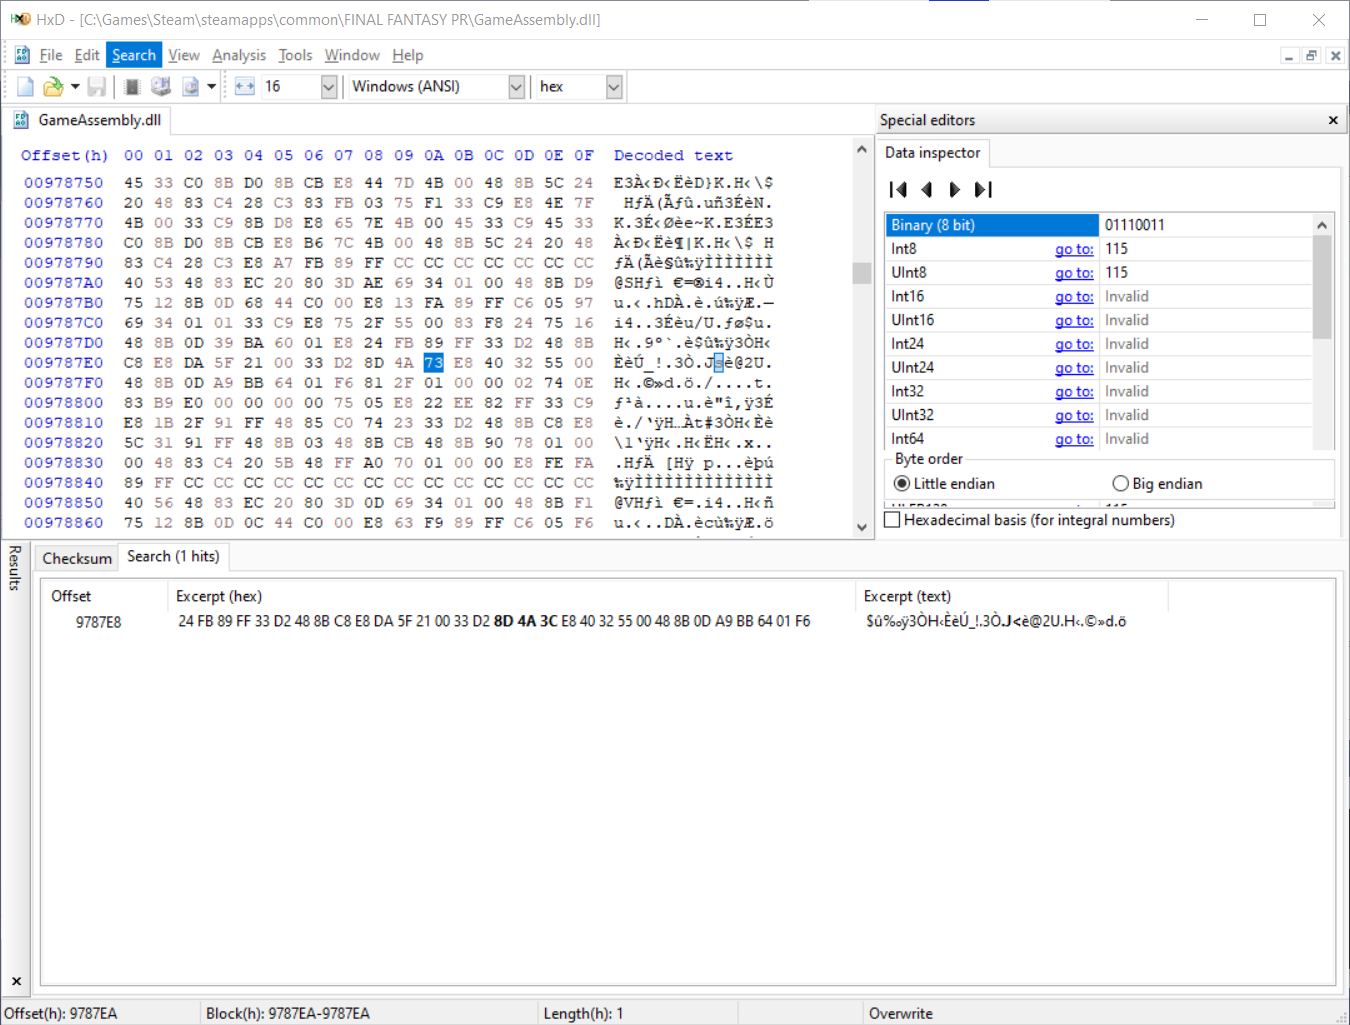 FINAL FANTASY - How to Edit GameAssembly.dll in a Hex Editor + Framerate Set Up/Unlock Guide